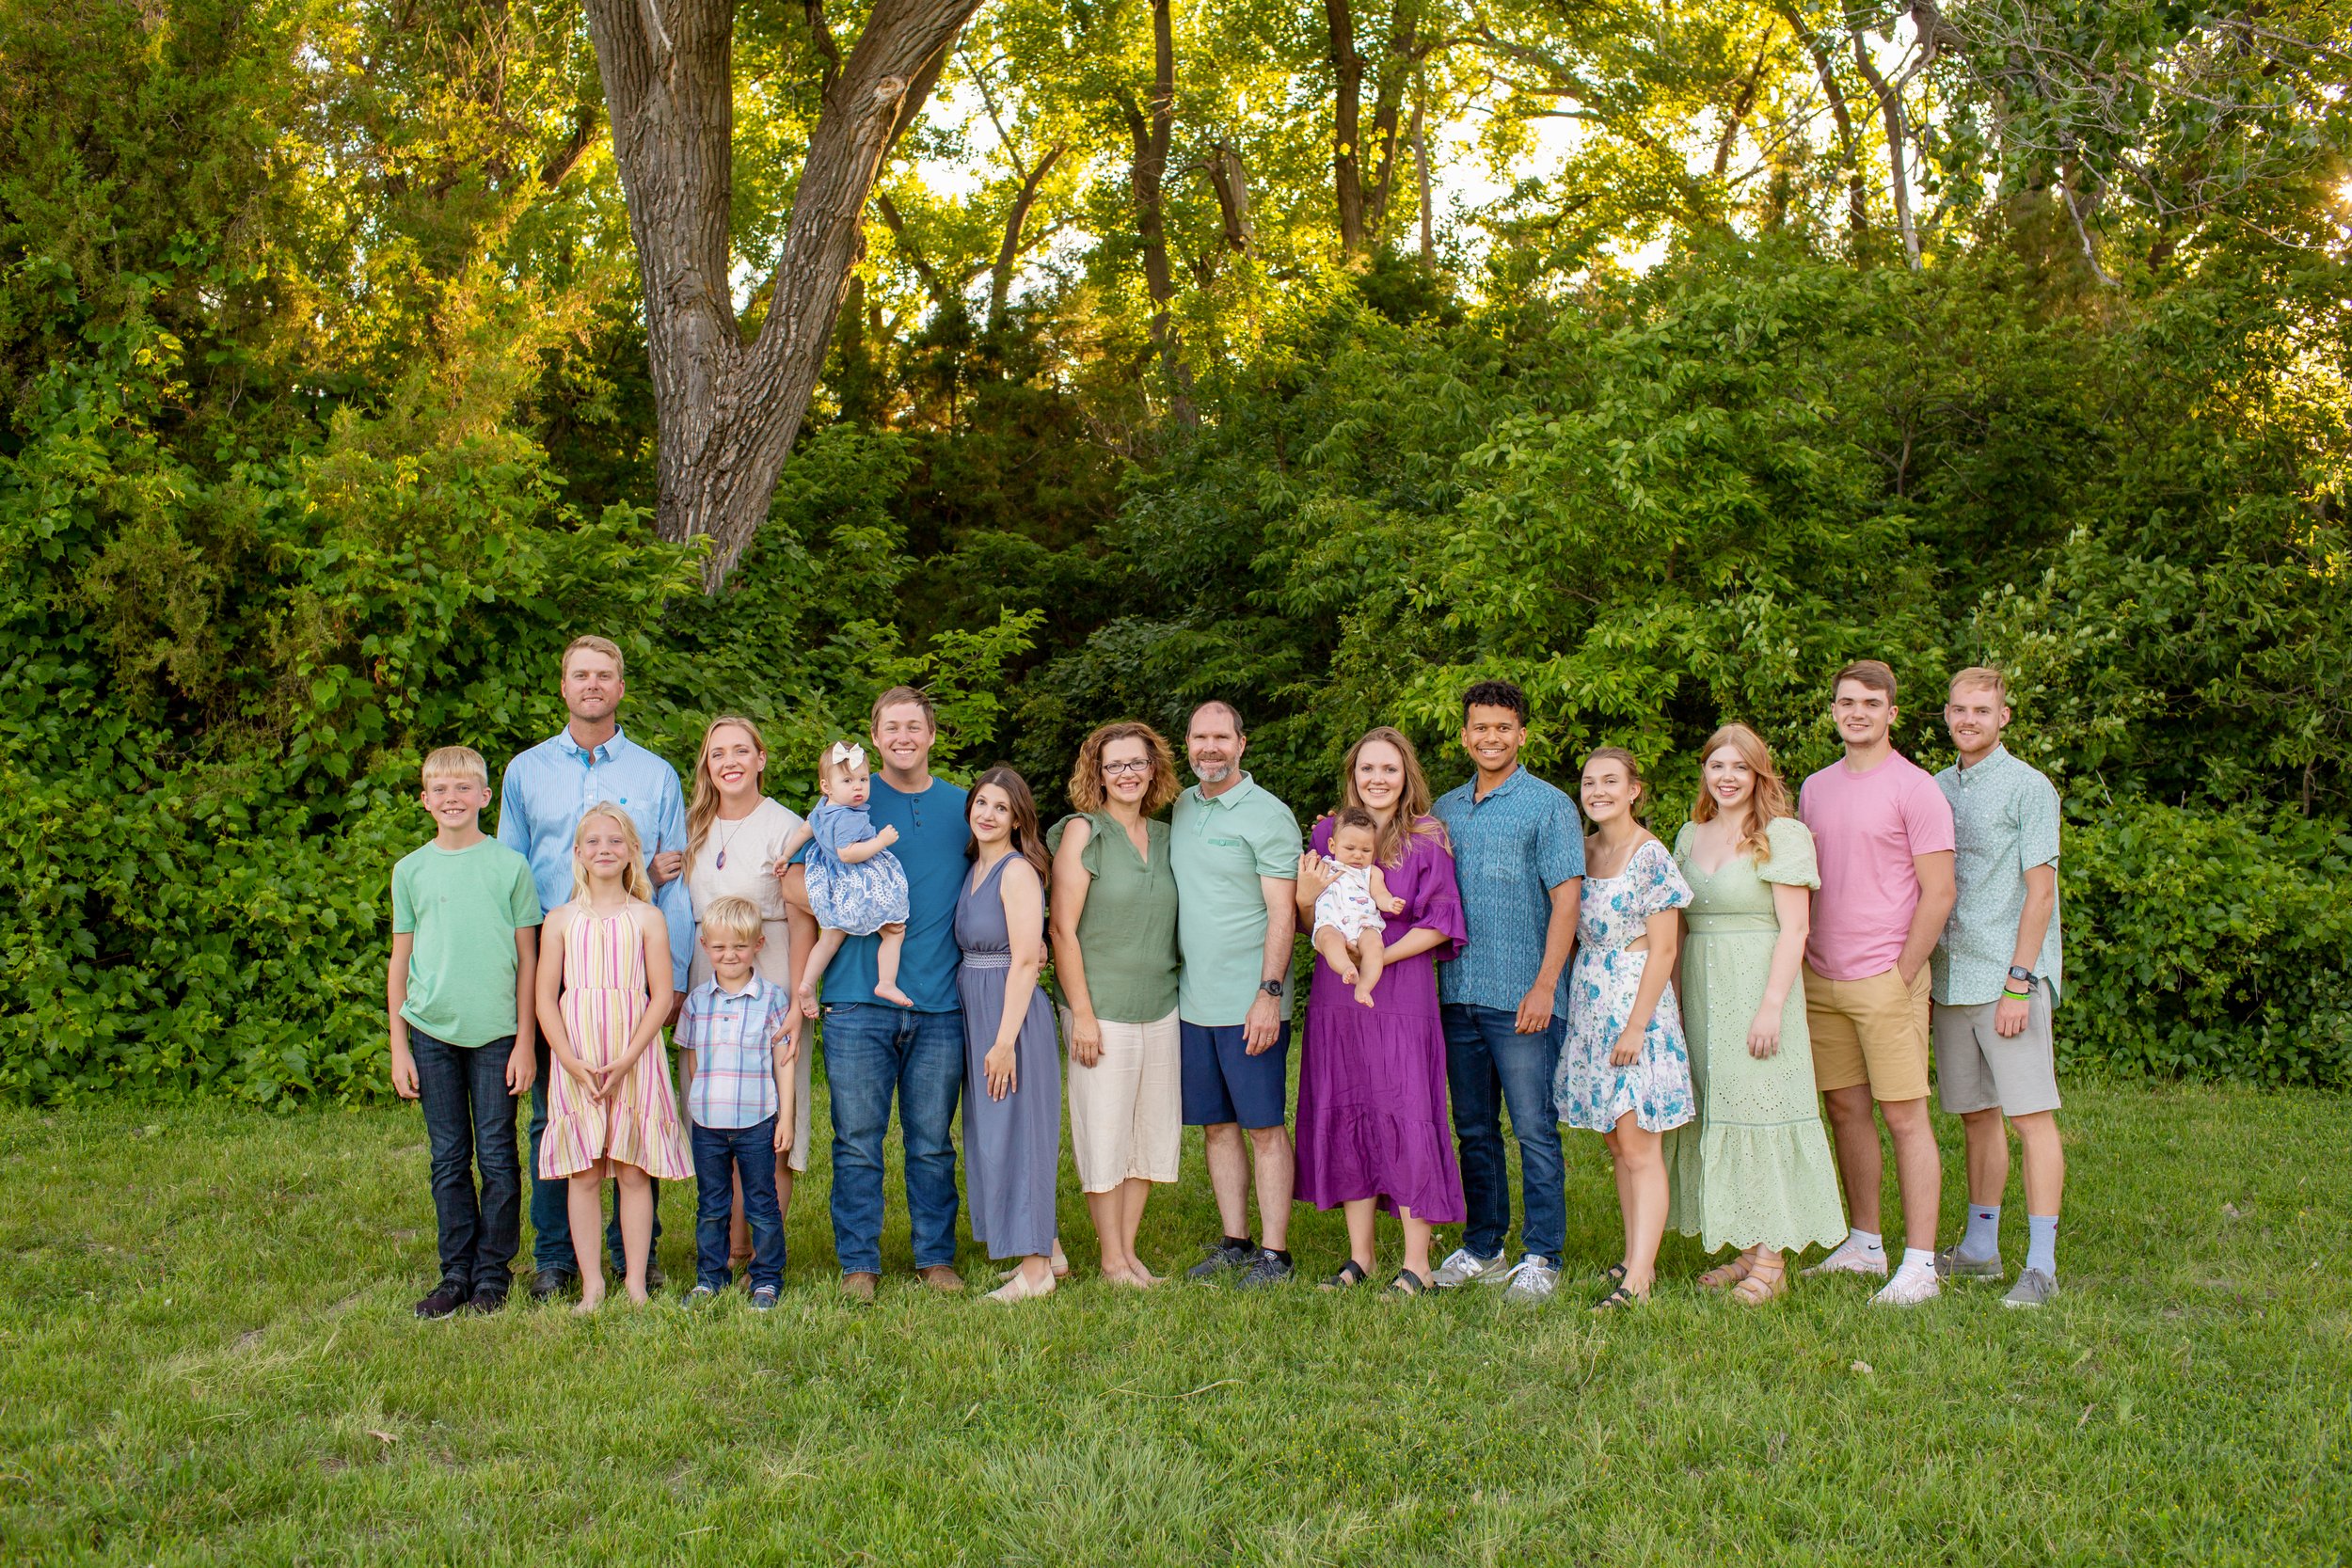  We ventured to Oshkosh and Lewellen this July for the Cheney Family Reunion (Chelsie’s biological mother’s side) and a small wedding reception for half-sister Annie and Eitan.  